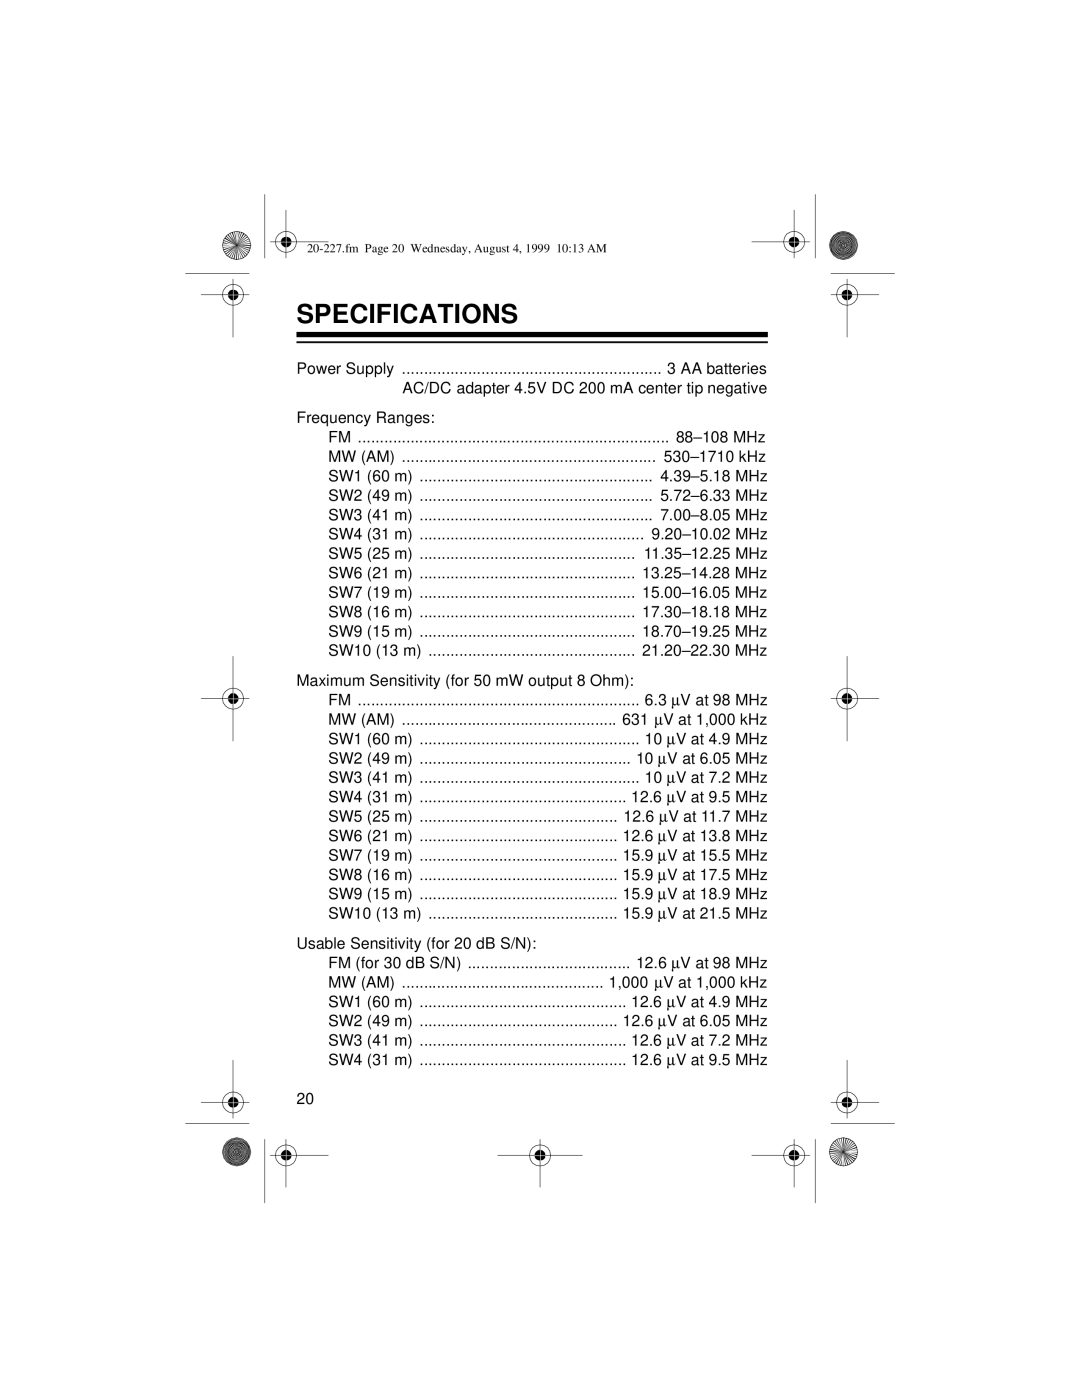 Radio Shack DX-397 owner manual Specifications 